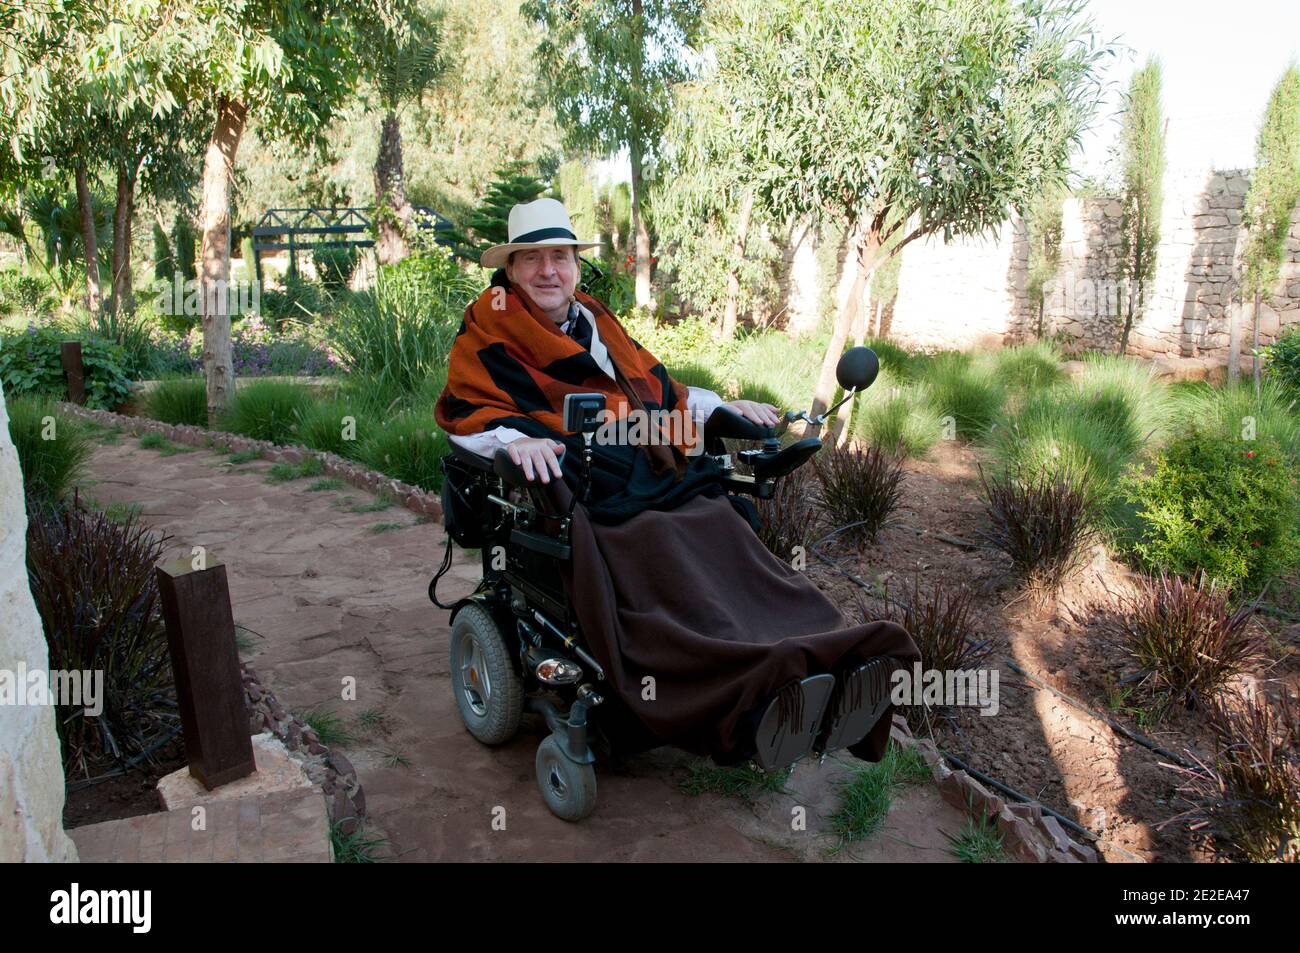 EXCLUSIVE - Philippe Pozzo di Borgo, who became quadriplegic after a paragliding accident in 1993, poses at his home in Essaouira, Morocco, November 15, 2011. His story inspired the movie 'Intouchables' directed by Olivier Nakache and Eric Toledano, released in France on November 2011, in which the actor Francois Cluzet plays his role and actor Omar Sy plays Abdel Seliou's role. In France, the movie reached 10 million of filmgoers. Photo by William Stevens/ABACAPRESS.COM Stock Photo